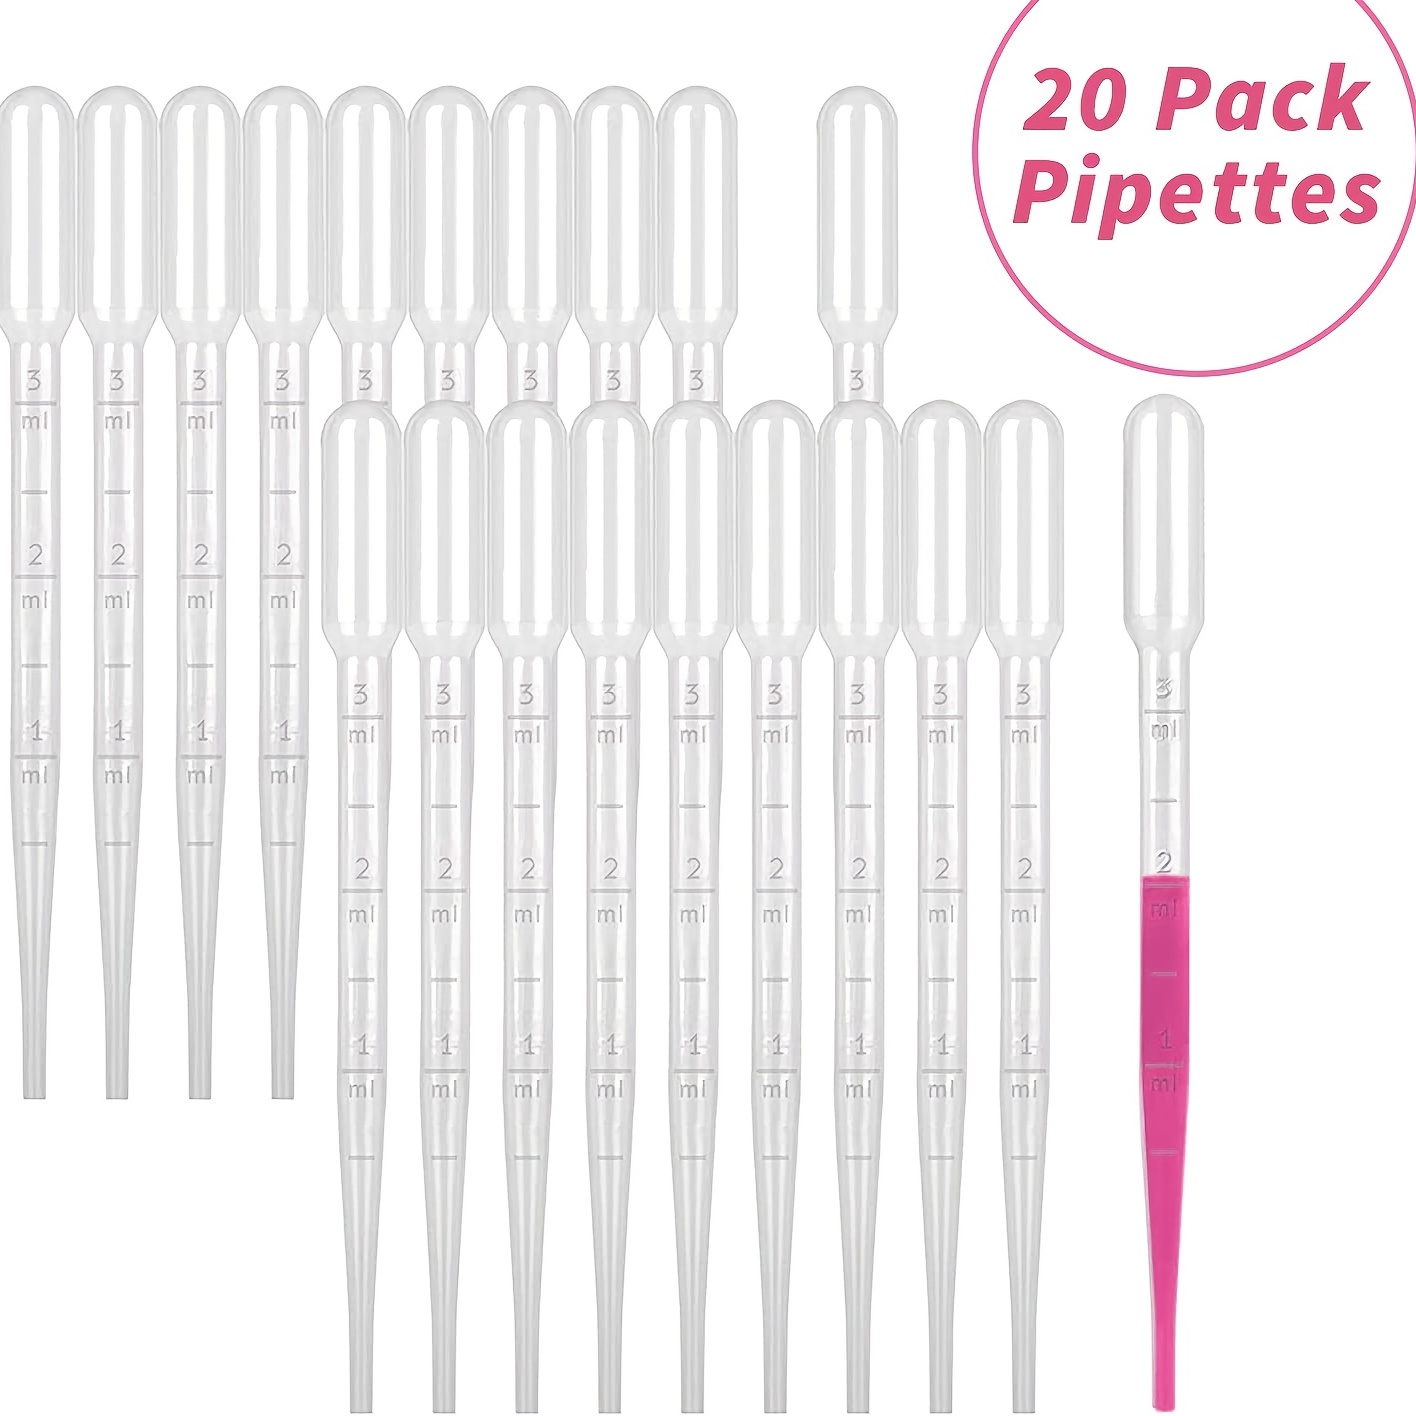 4 Pack 20mL Syringes for Lip Gloss Making Supplies Liquid TKP Lipgloss Base  Flavoring Oil Oral Medicine Injection Feeding- with Tip Cap and Pipettes